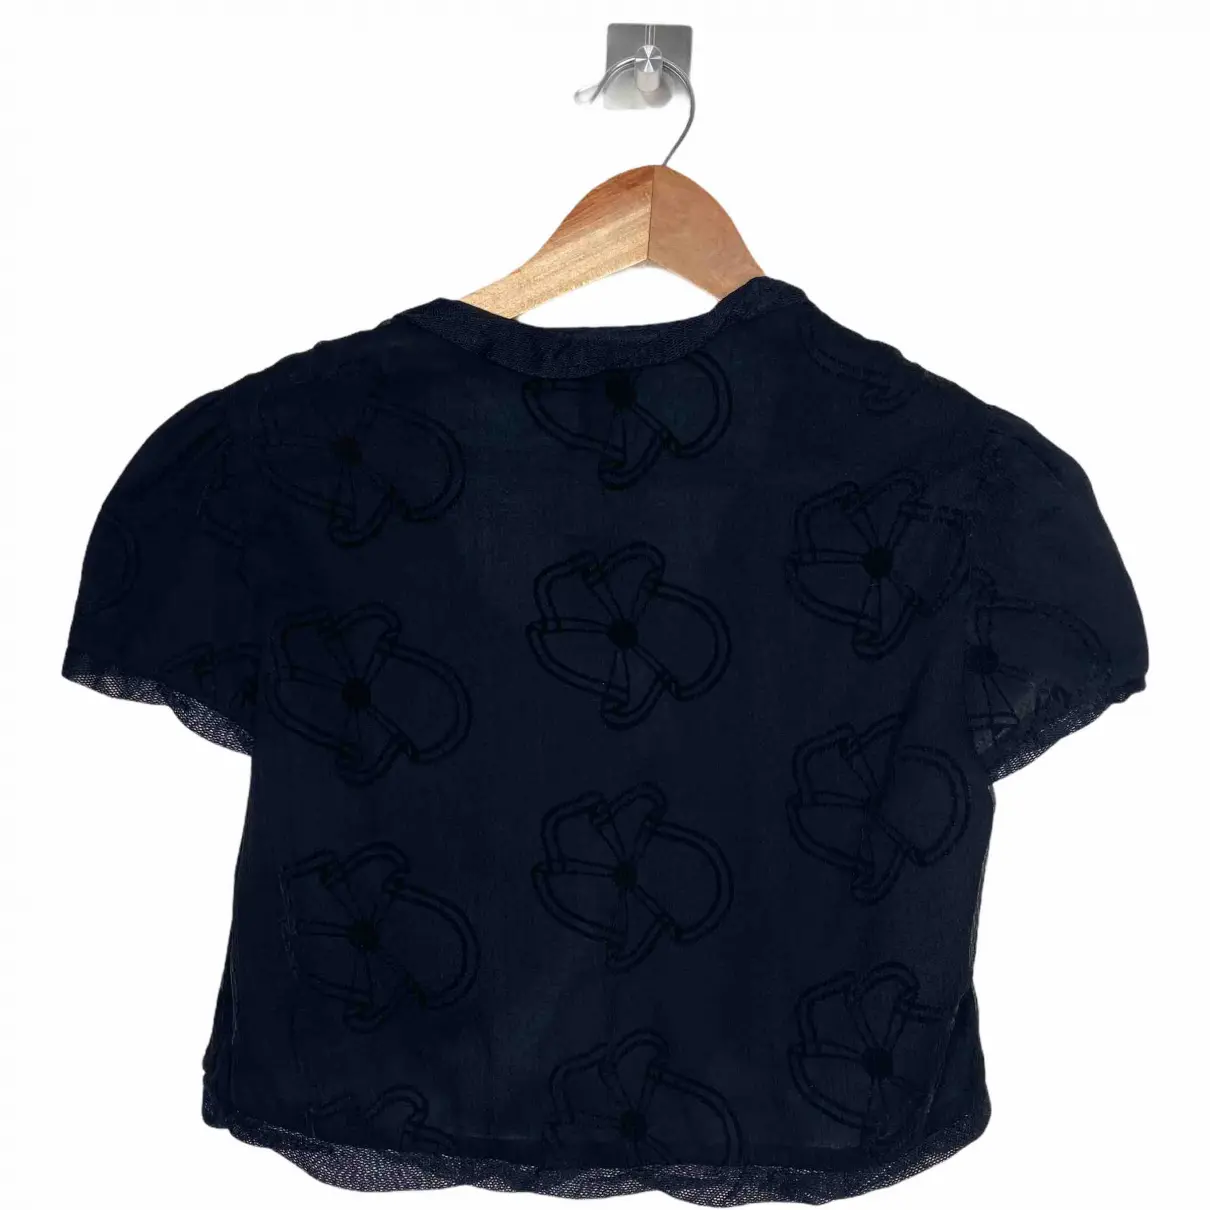 Buy Marc by Marc Jacobs Silk blouse online